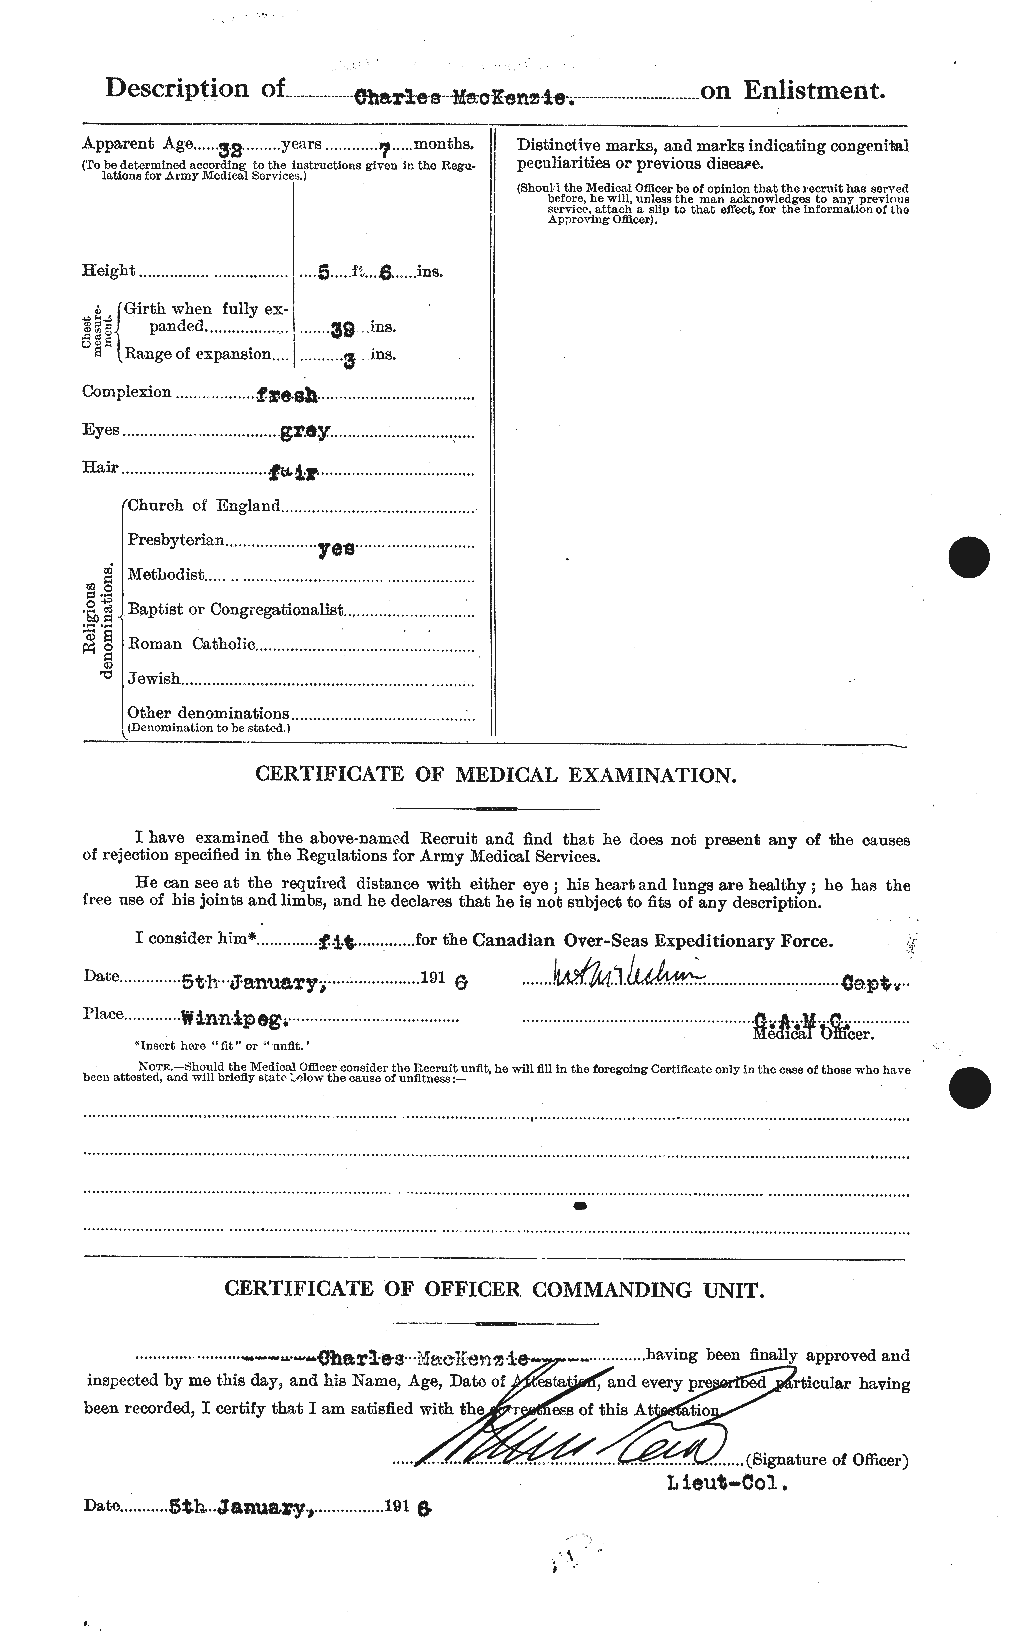 Personnel Records of the First World War - CEF 528916b